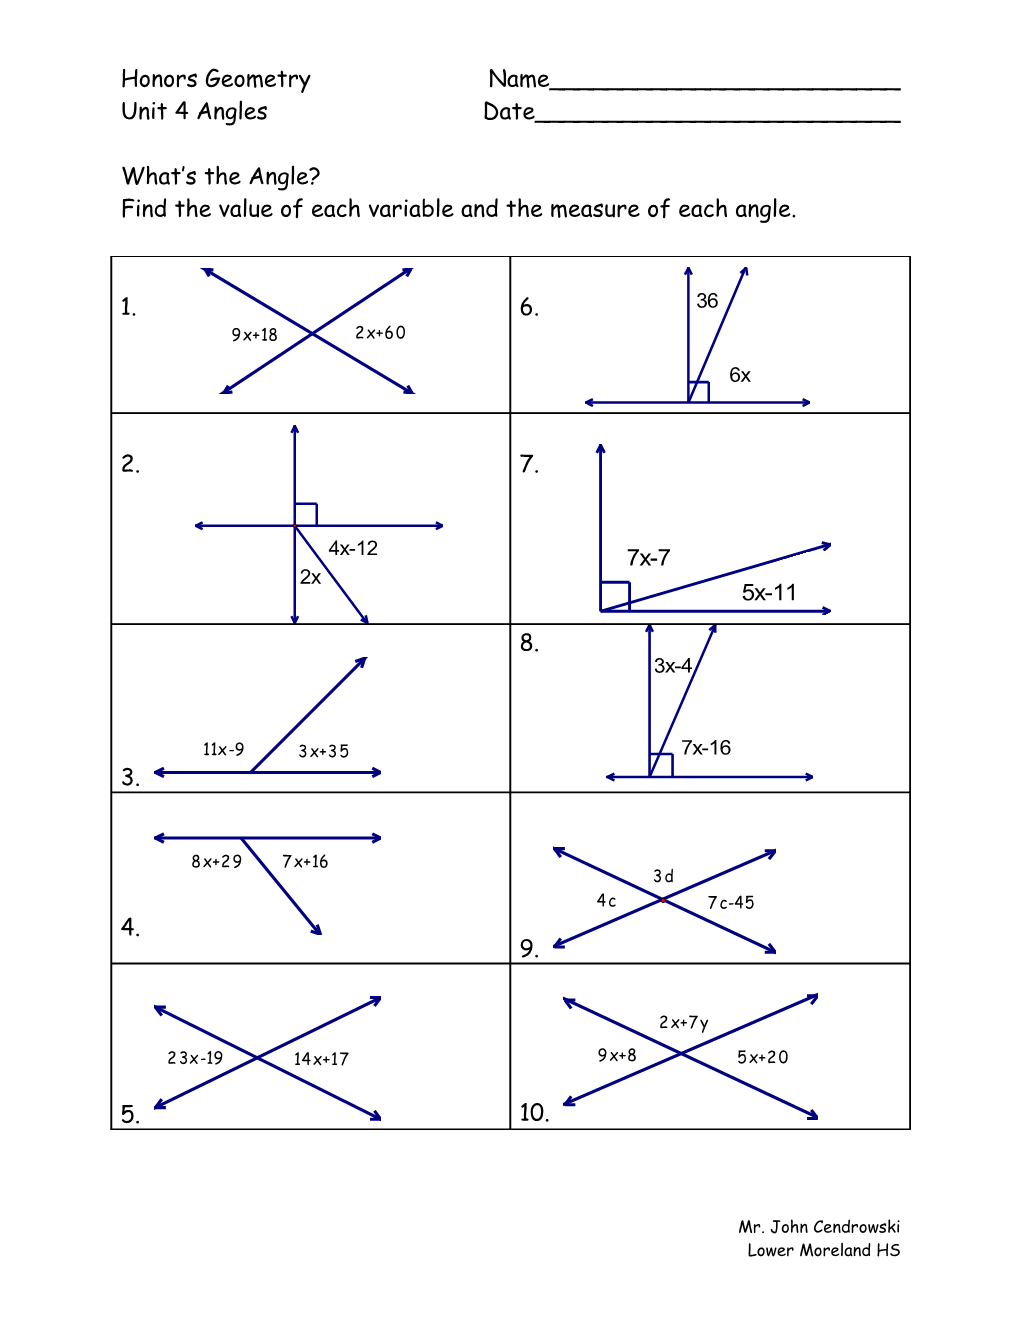 Find the Value of Each Variable and the Measure of Each Angle